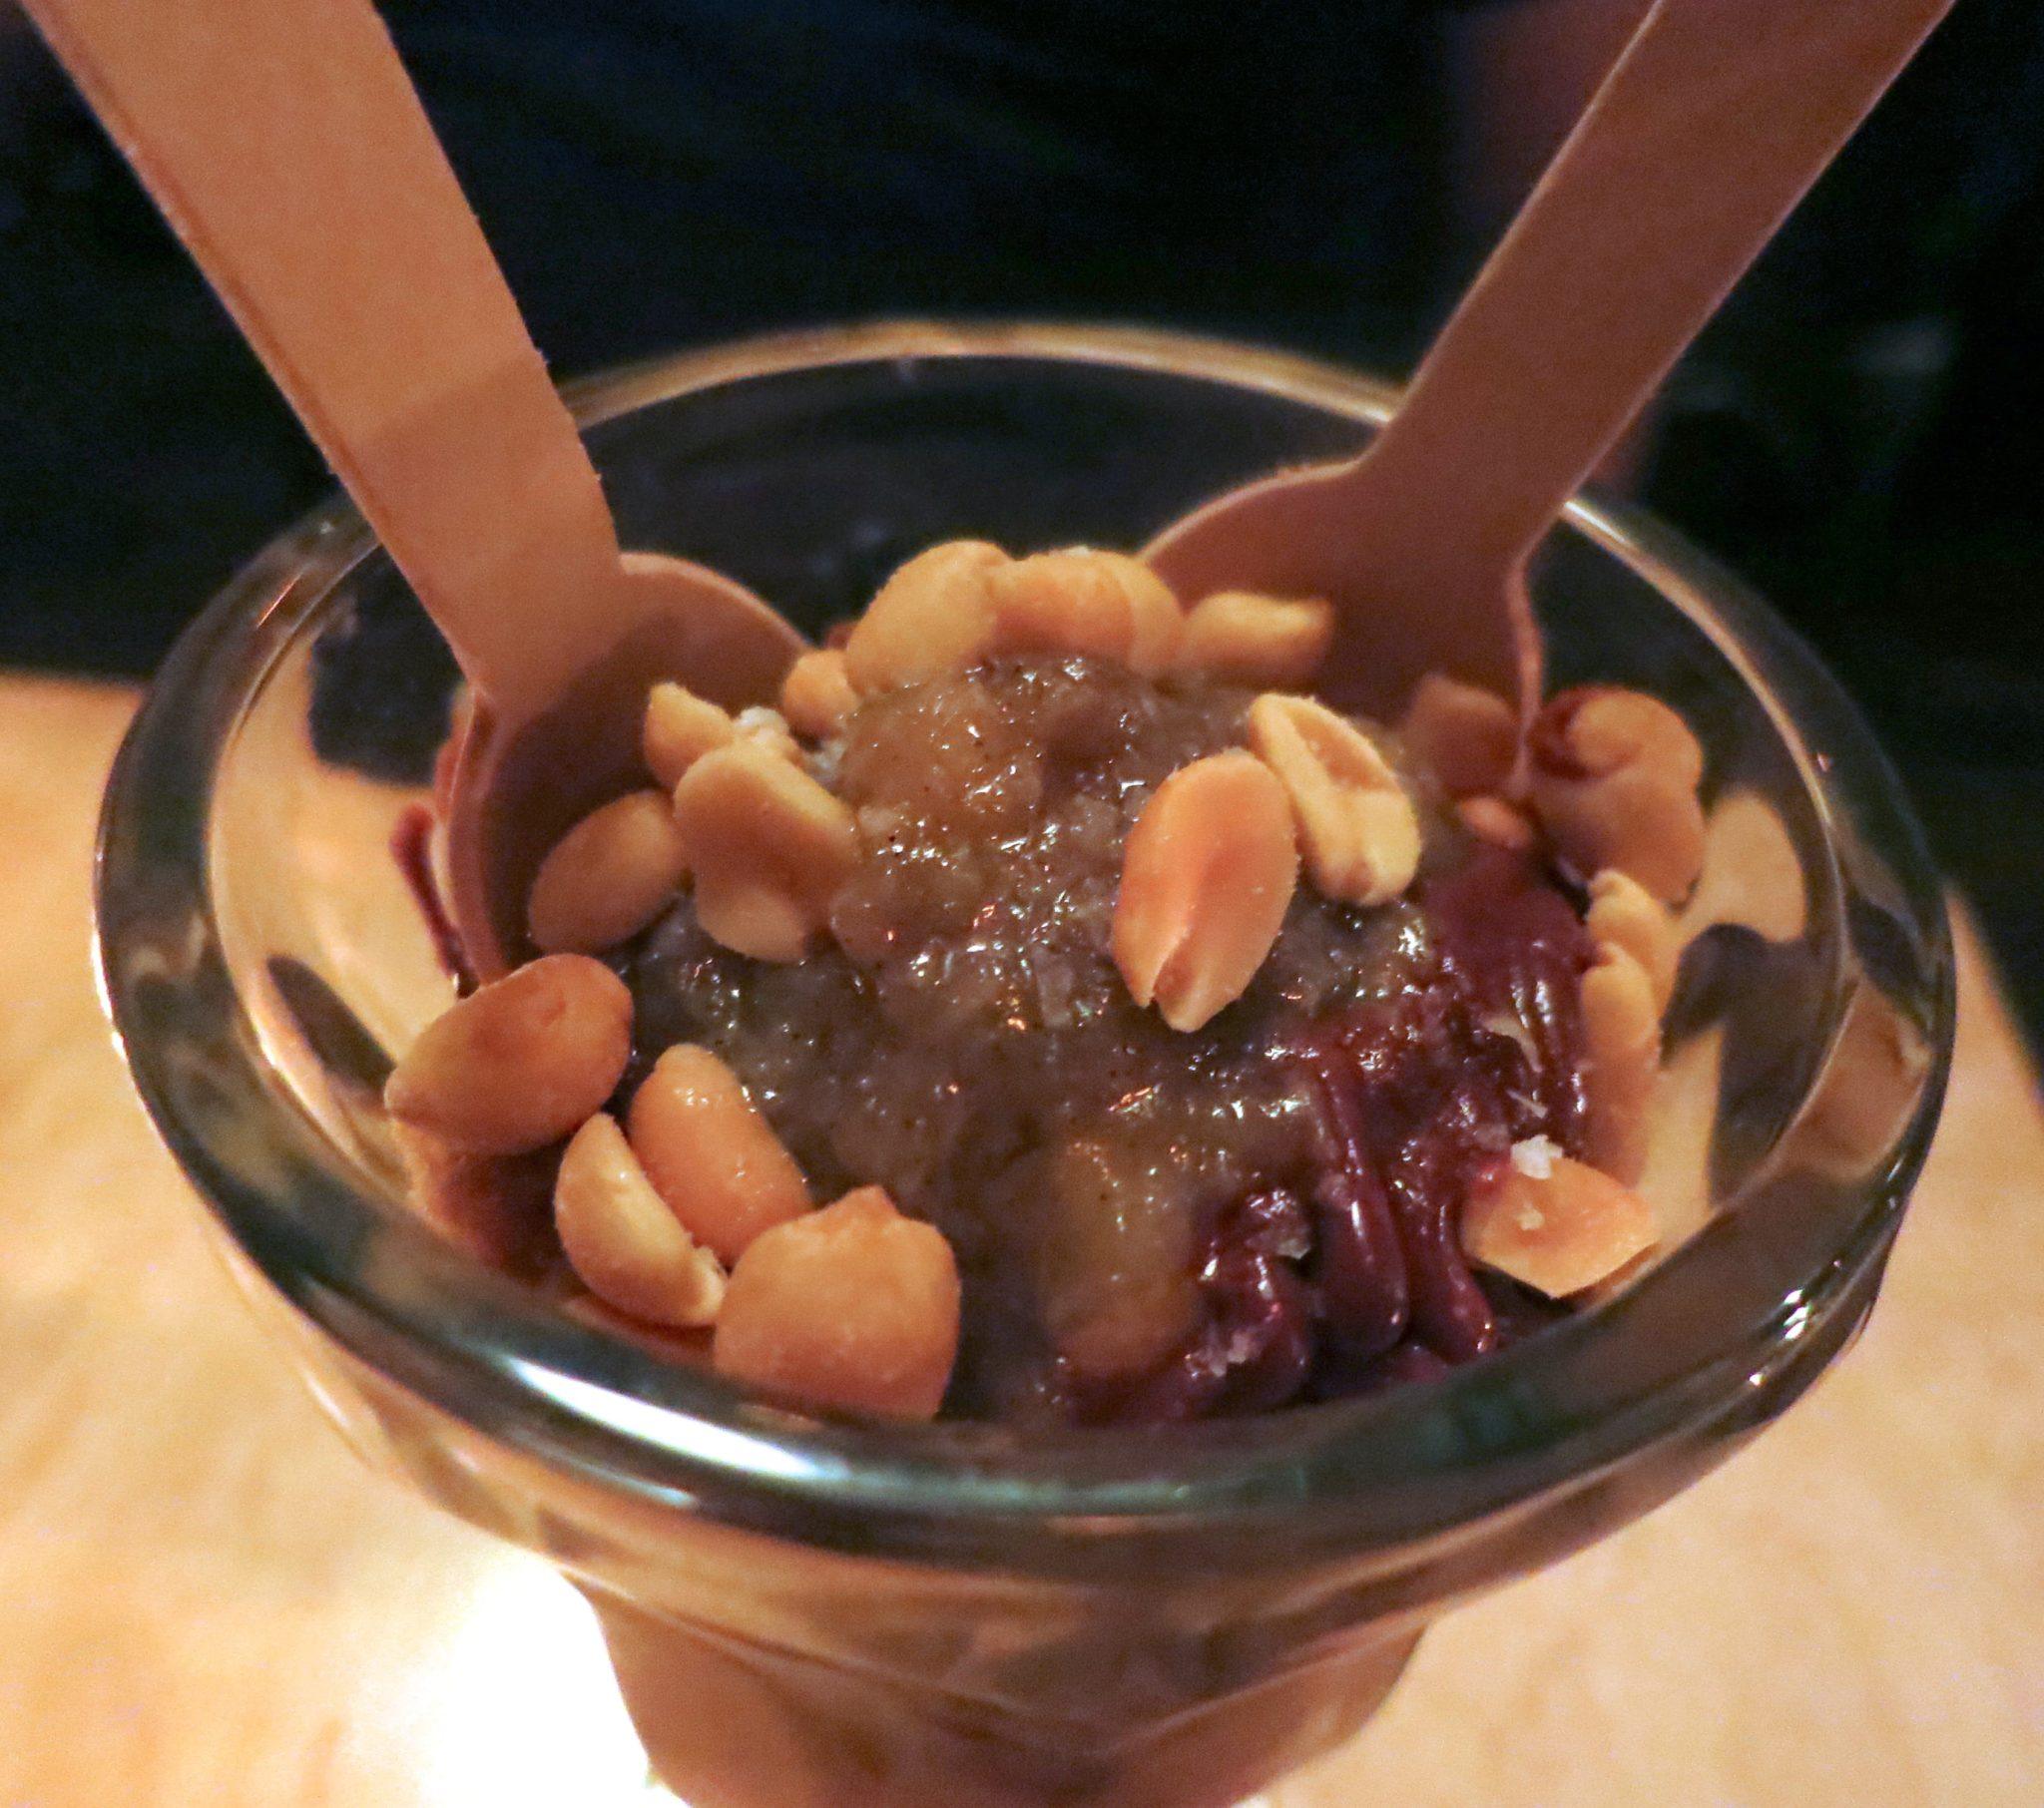 Peanut Butter Parfait at the Black Hoof in Toronto Canada